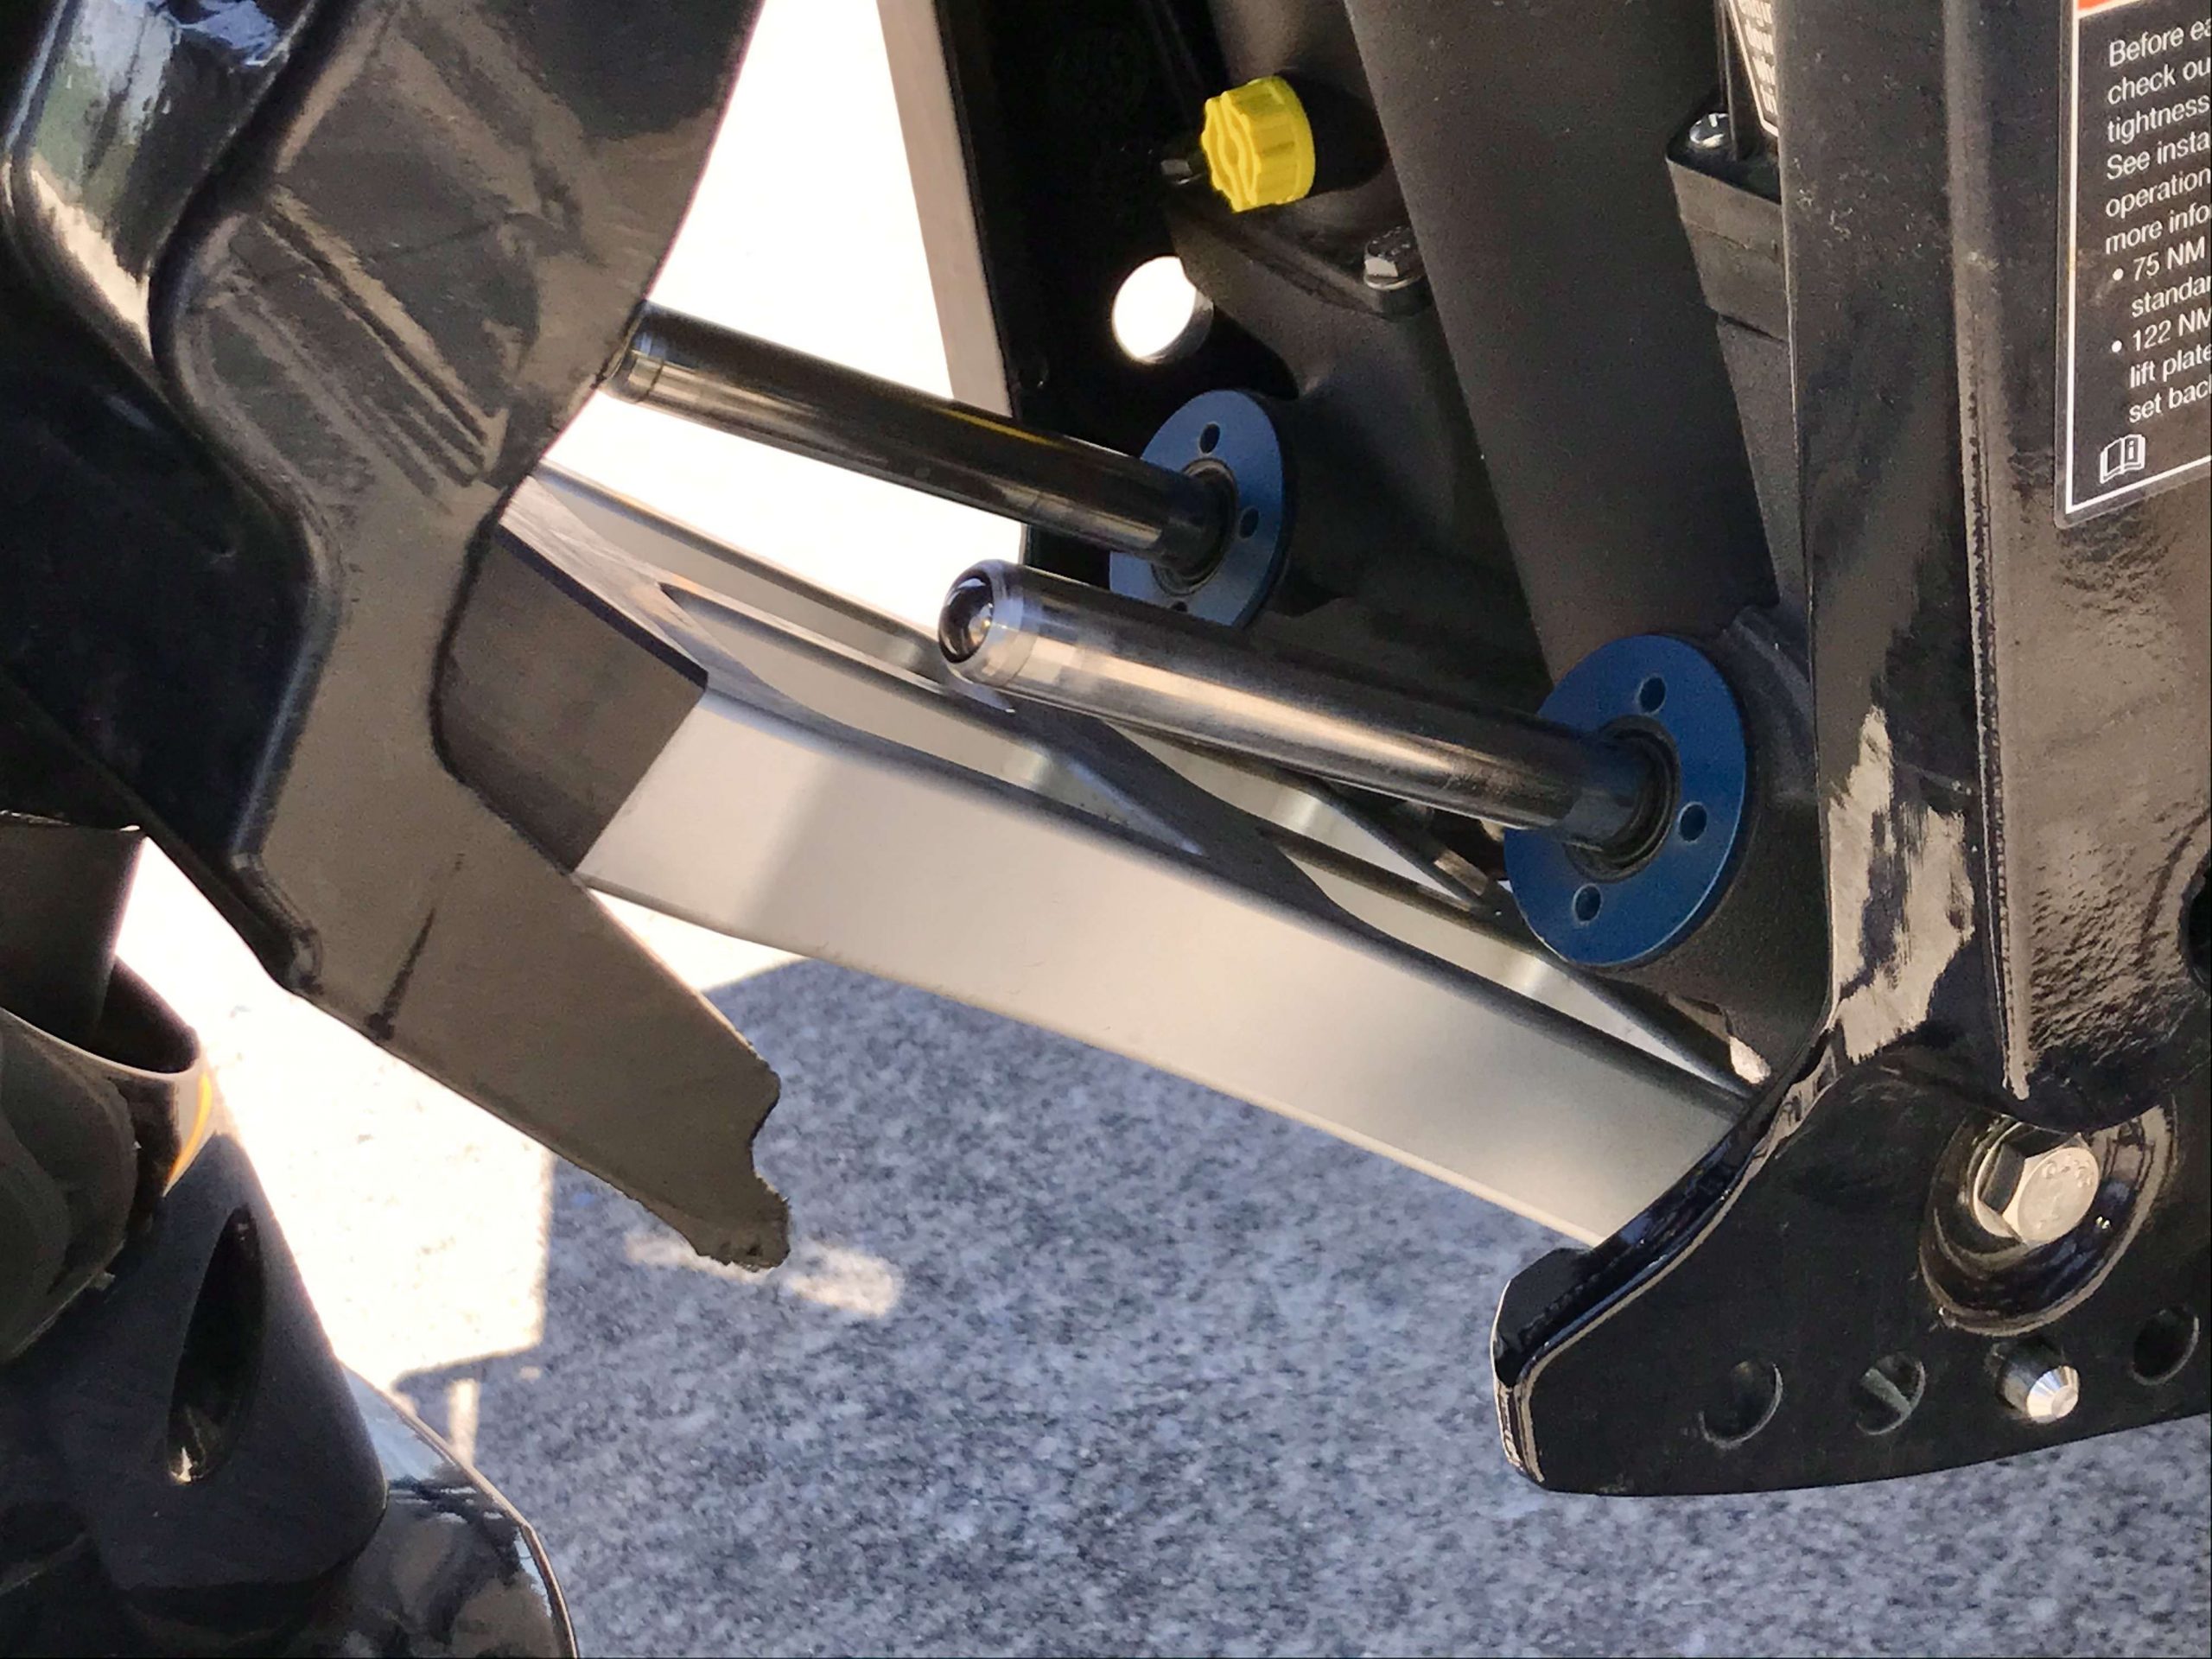 <b>Transom saver.</b> Traveling the country, often over bumpy roads, Johnston finds that his GeigerTec Marine Transom Saver helps prevent damage with a lightweight, stainless steel frame thatâs easy to install and remove.
